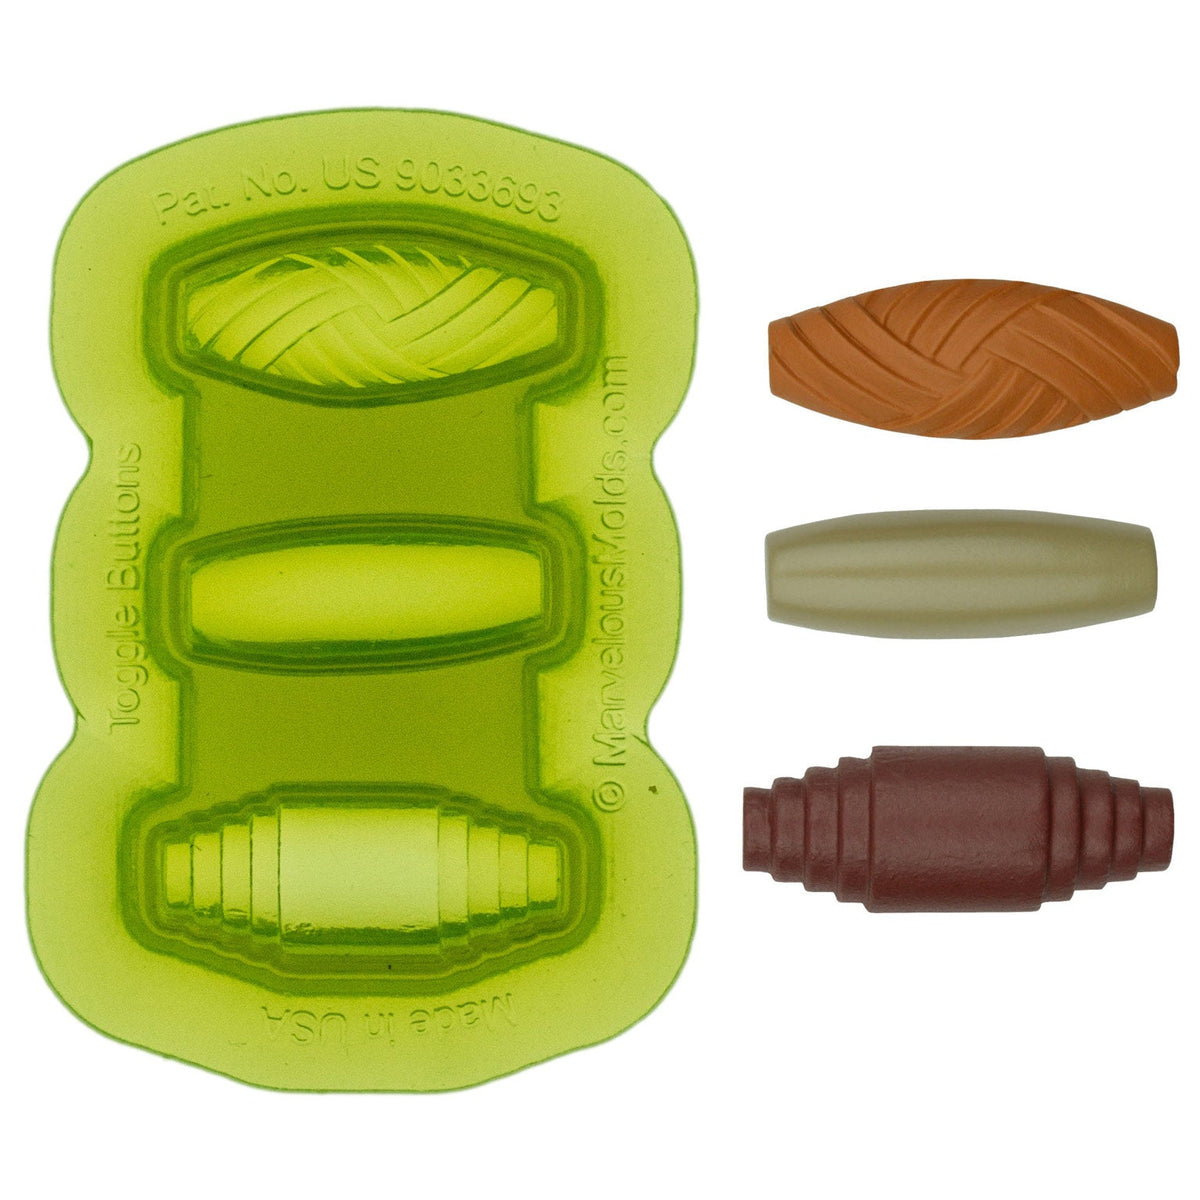 Basic Buttons Silicone Fondant Mold by Marvelous Molds 